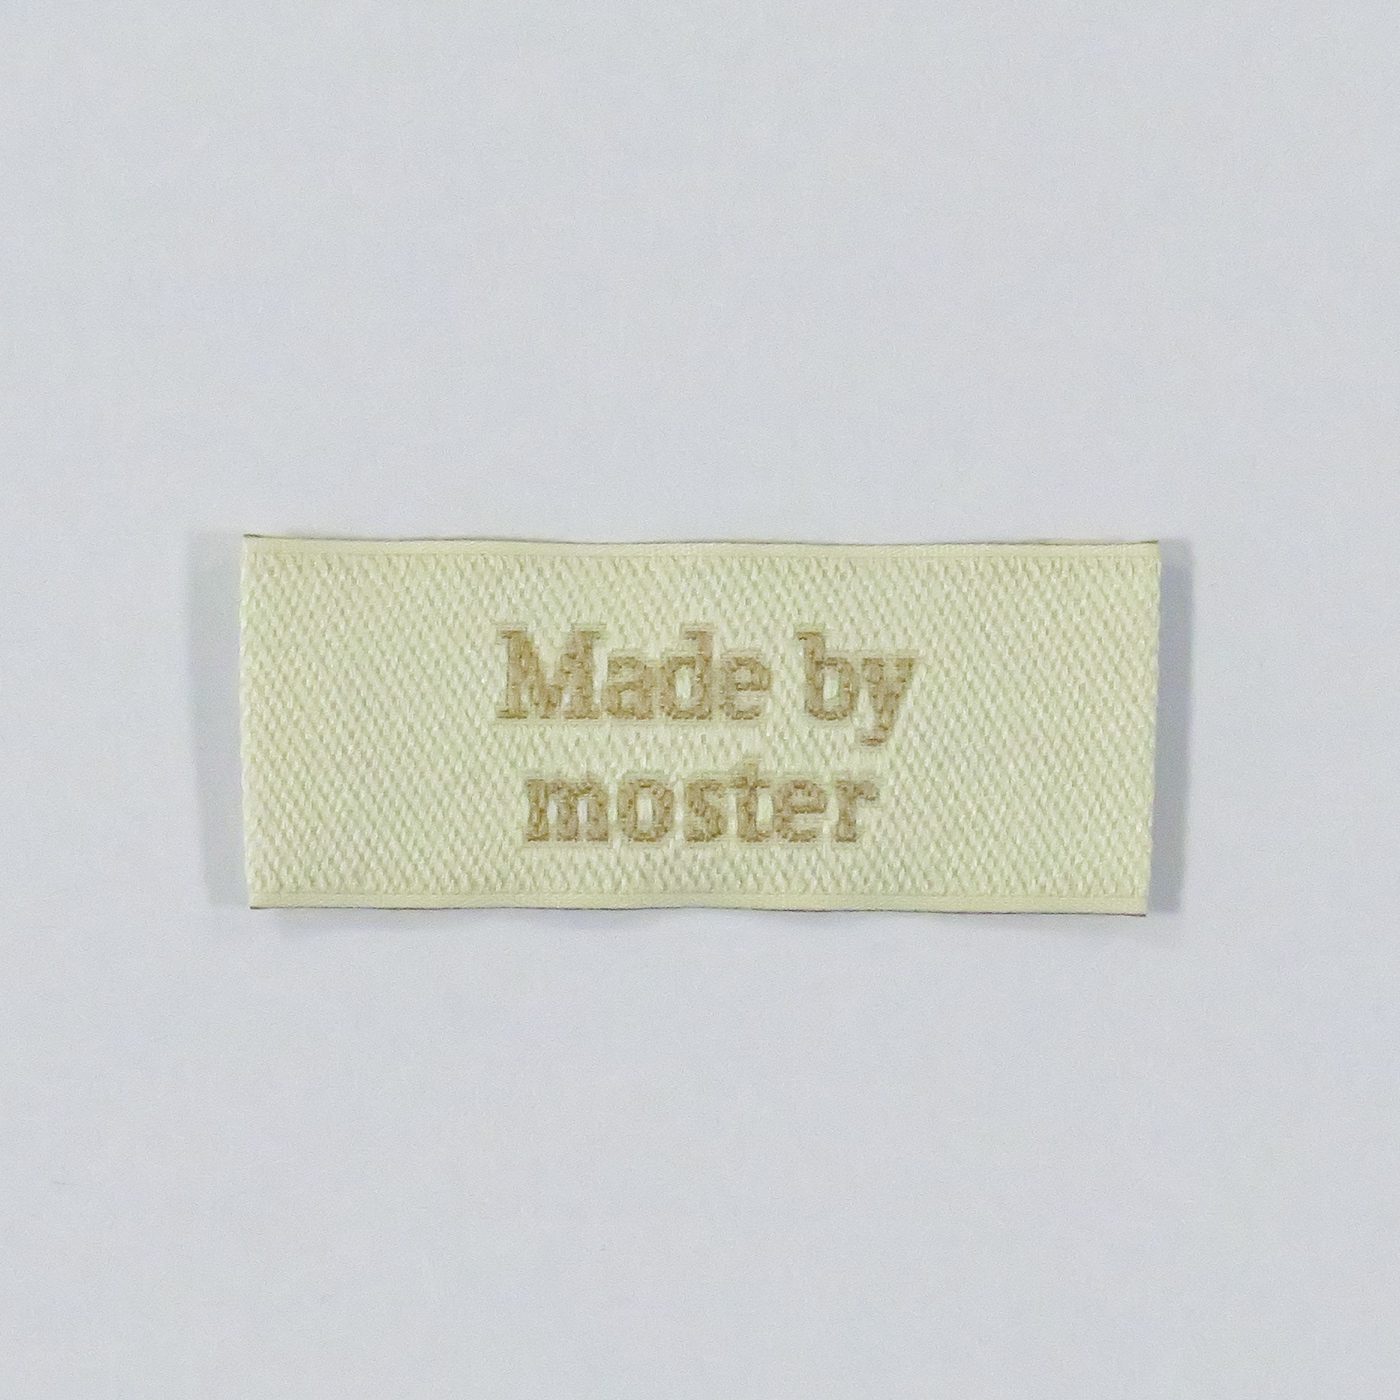 "Made by Moster"